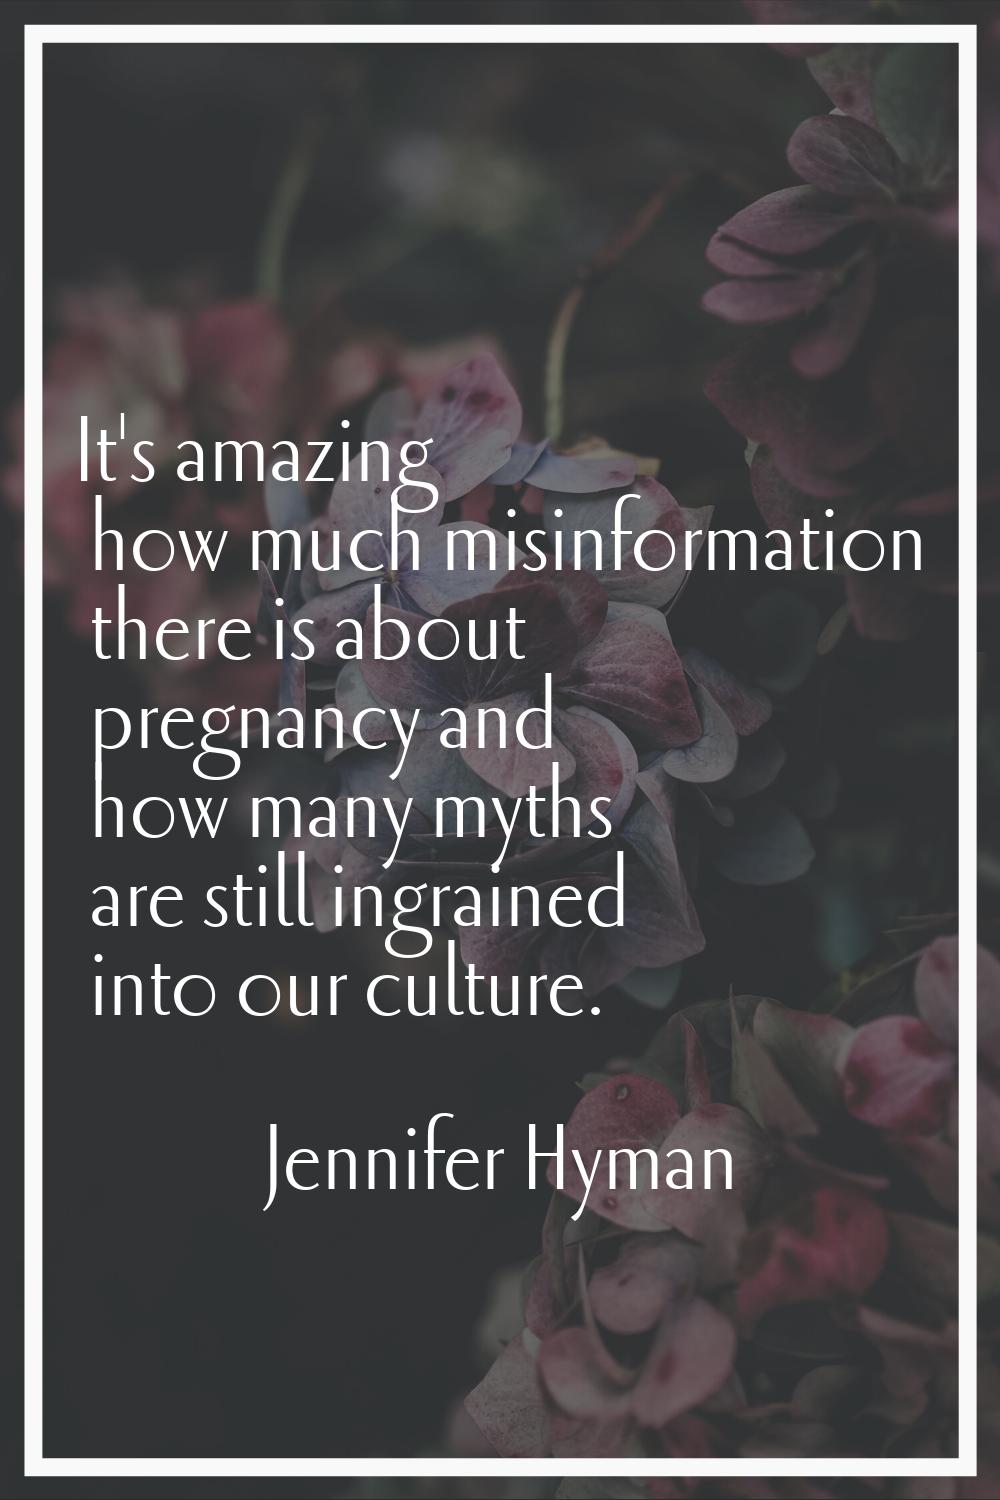 It's amazing how much misinformation there is about pregnancy and how many myths are still ingraine